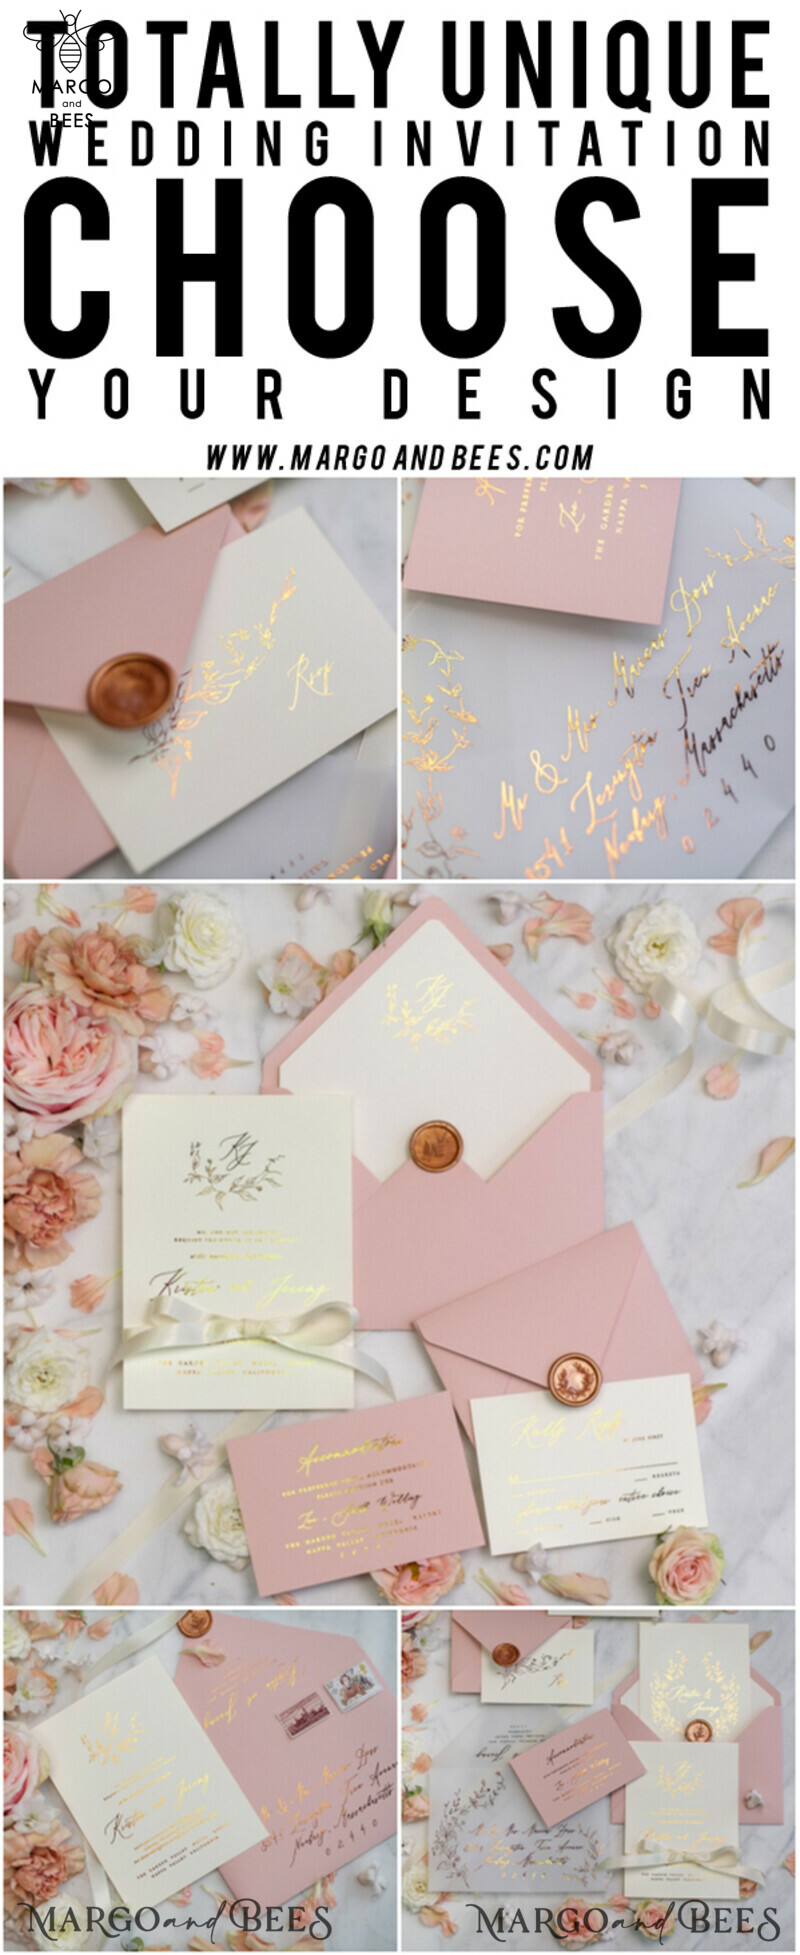 Stunning Blush Pink Wedding Invitations with Glamourous Gold Foil Accents and Elegant Vellum Details: A Bespoke Wedding Invitation Suite-40